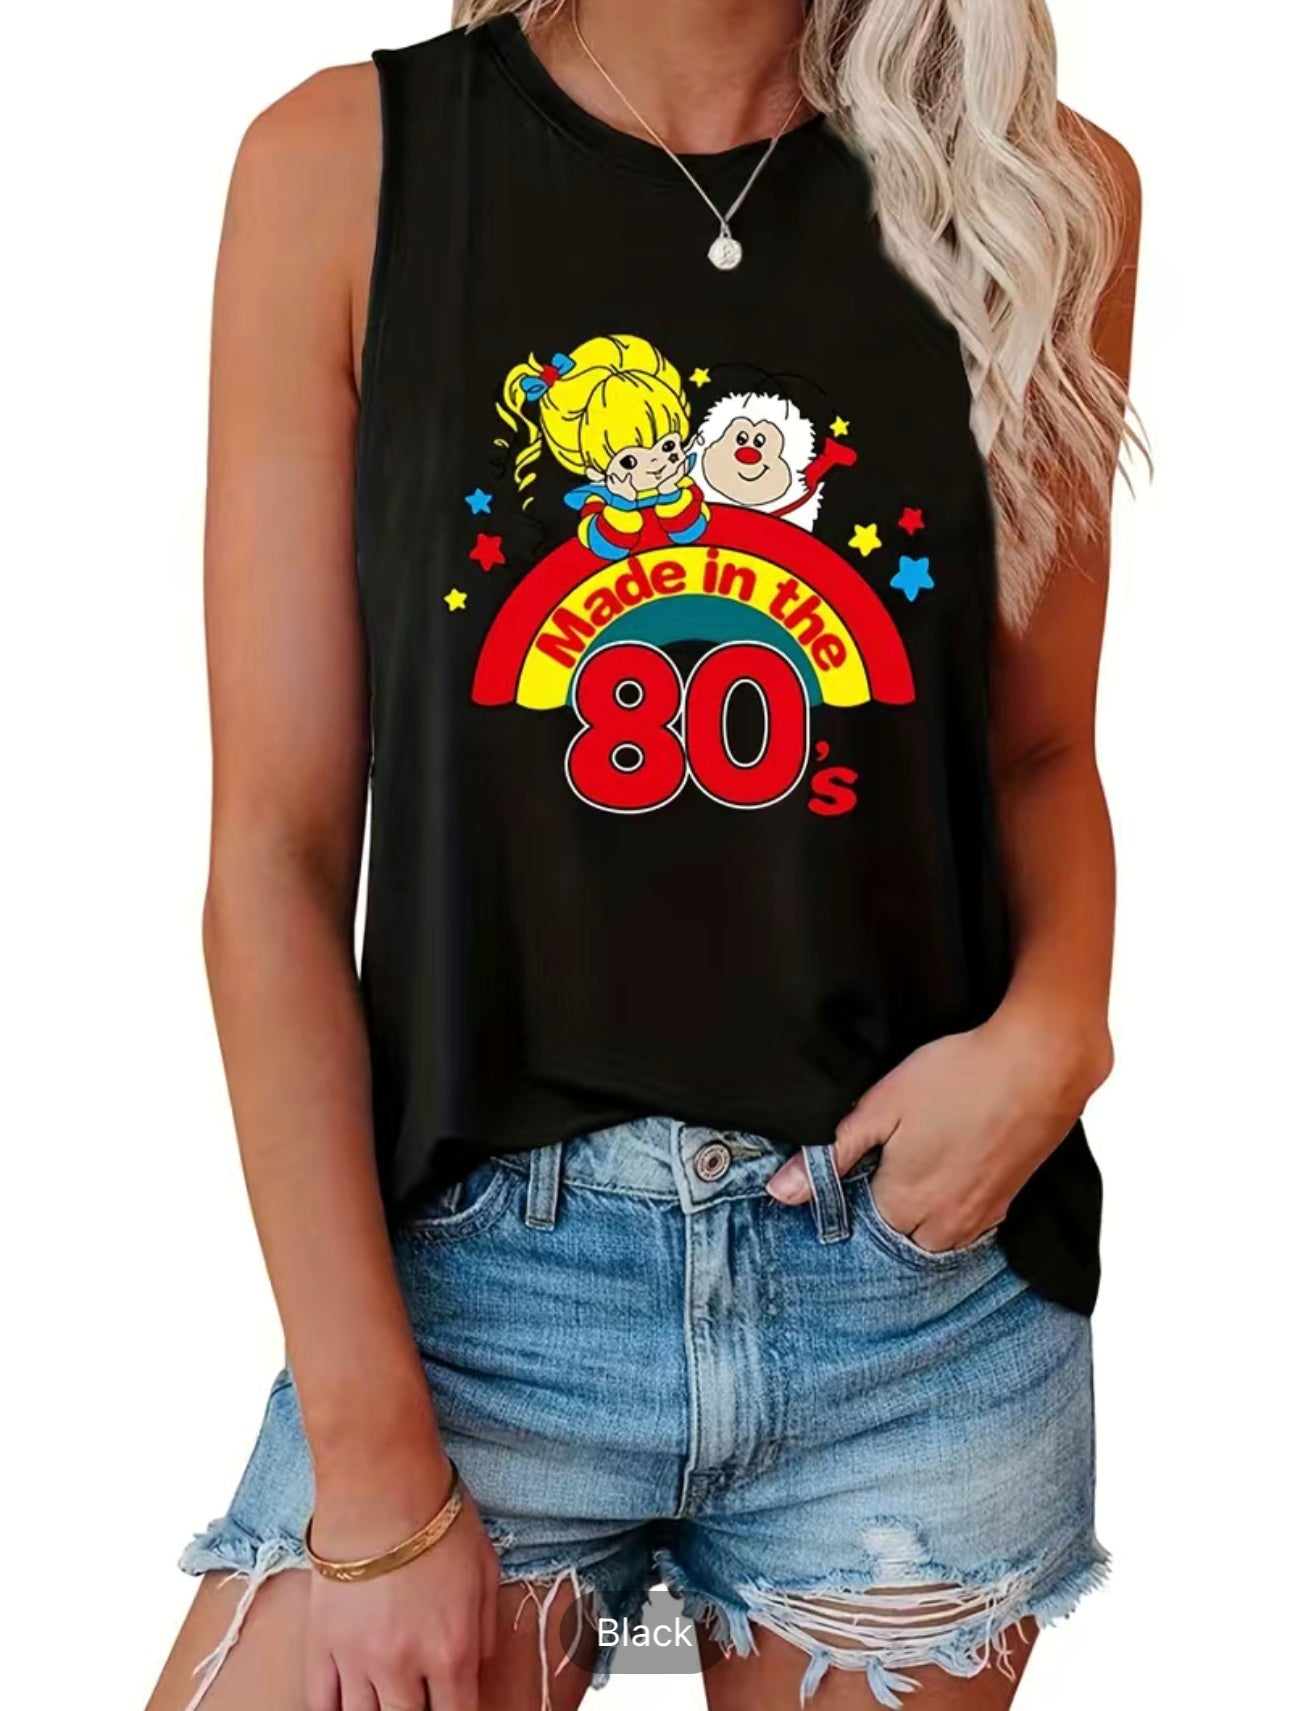 Made In The 80's Print Tank Top, Sleeveless Crew Neck Casual Top For Summer & Spring, Women's Clothing